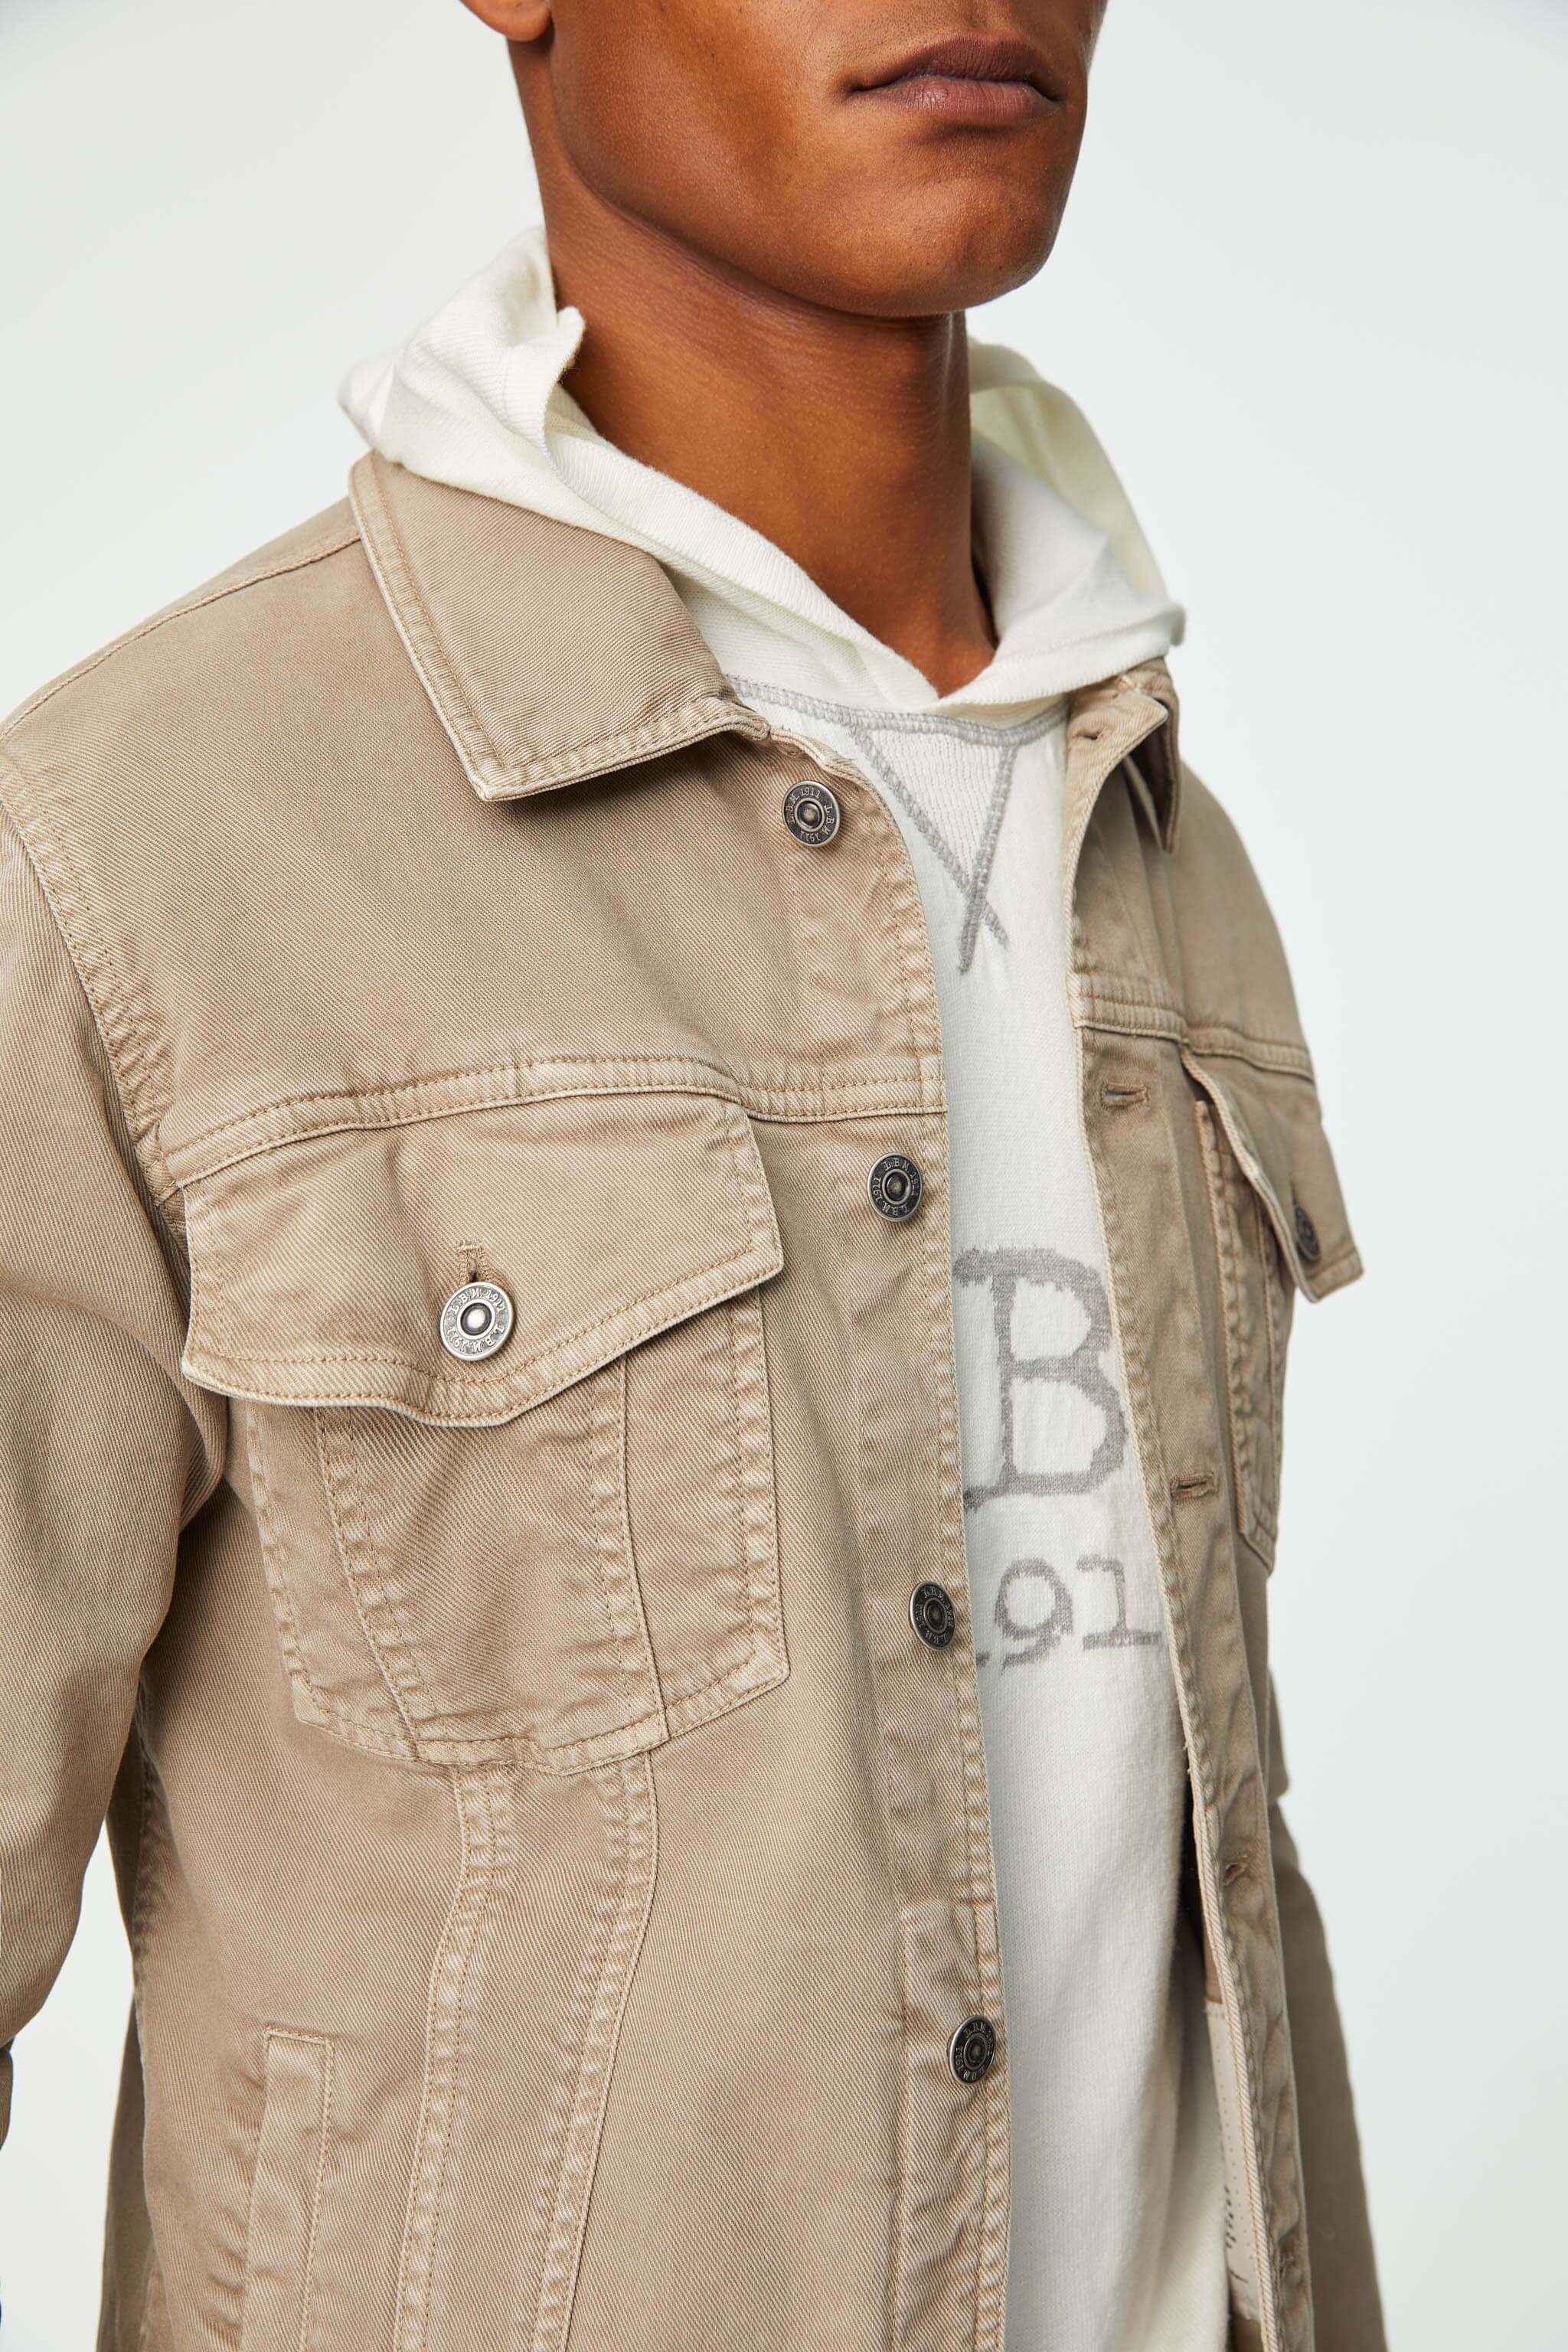 Garment-dyed jacket in dove gray